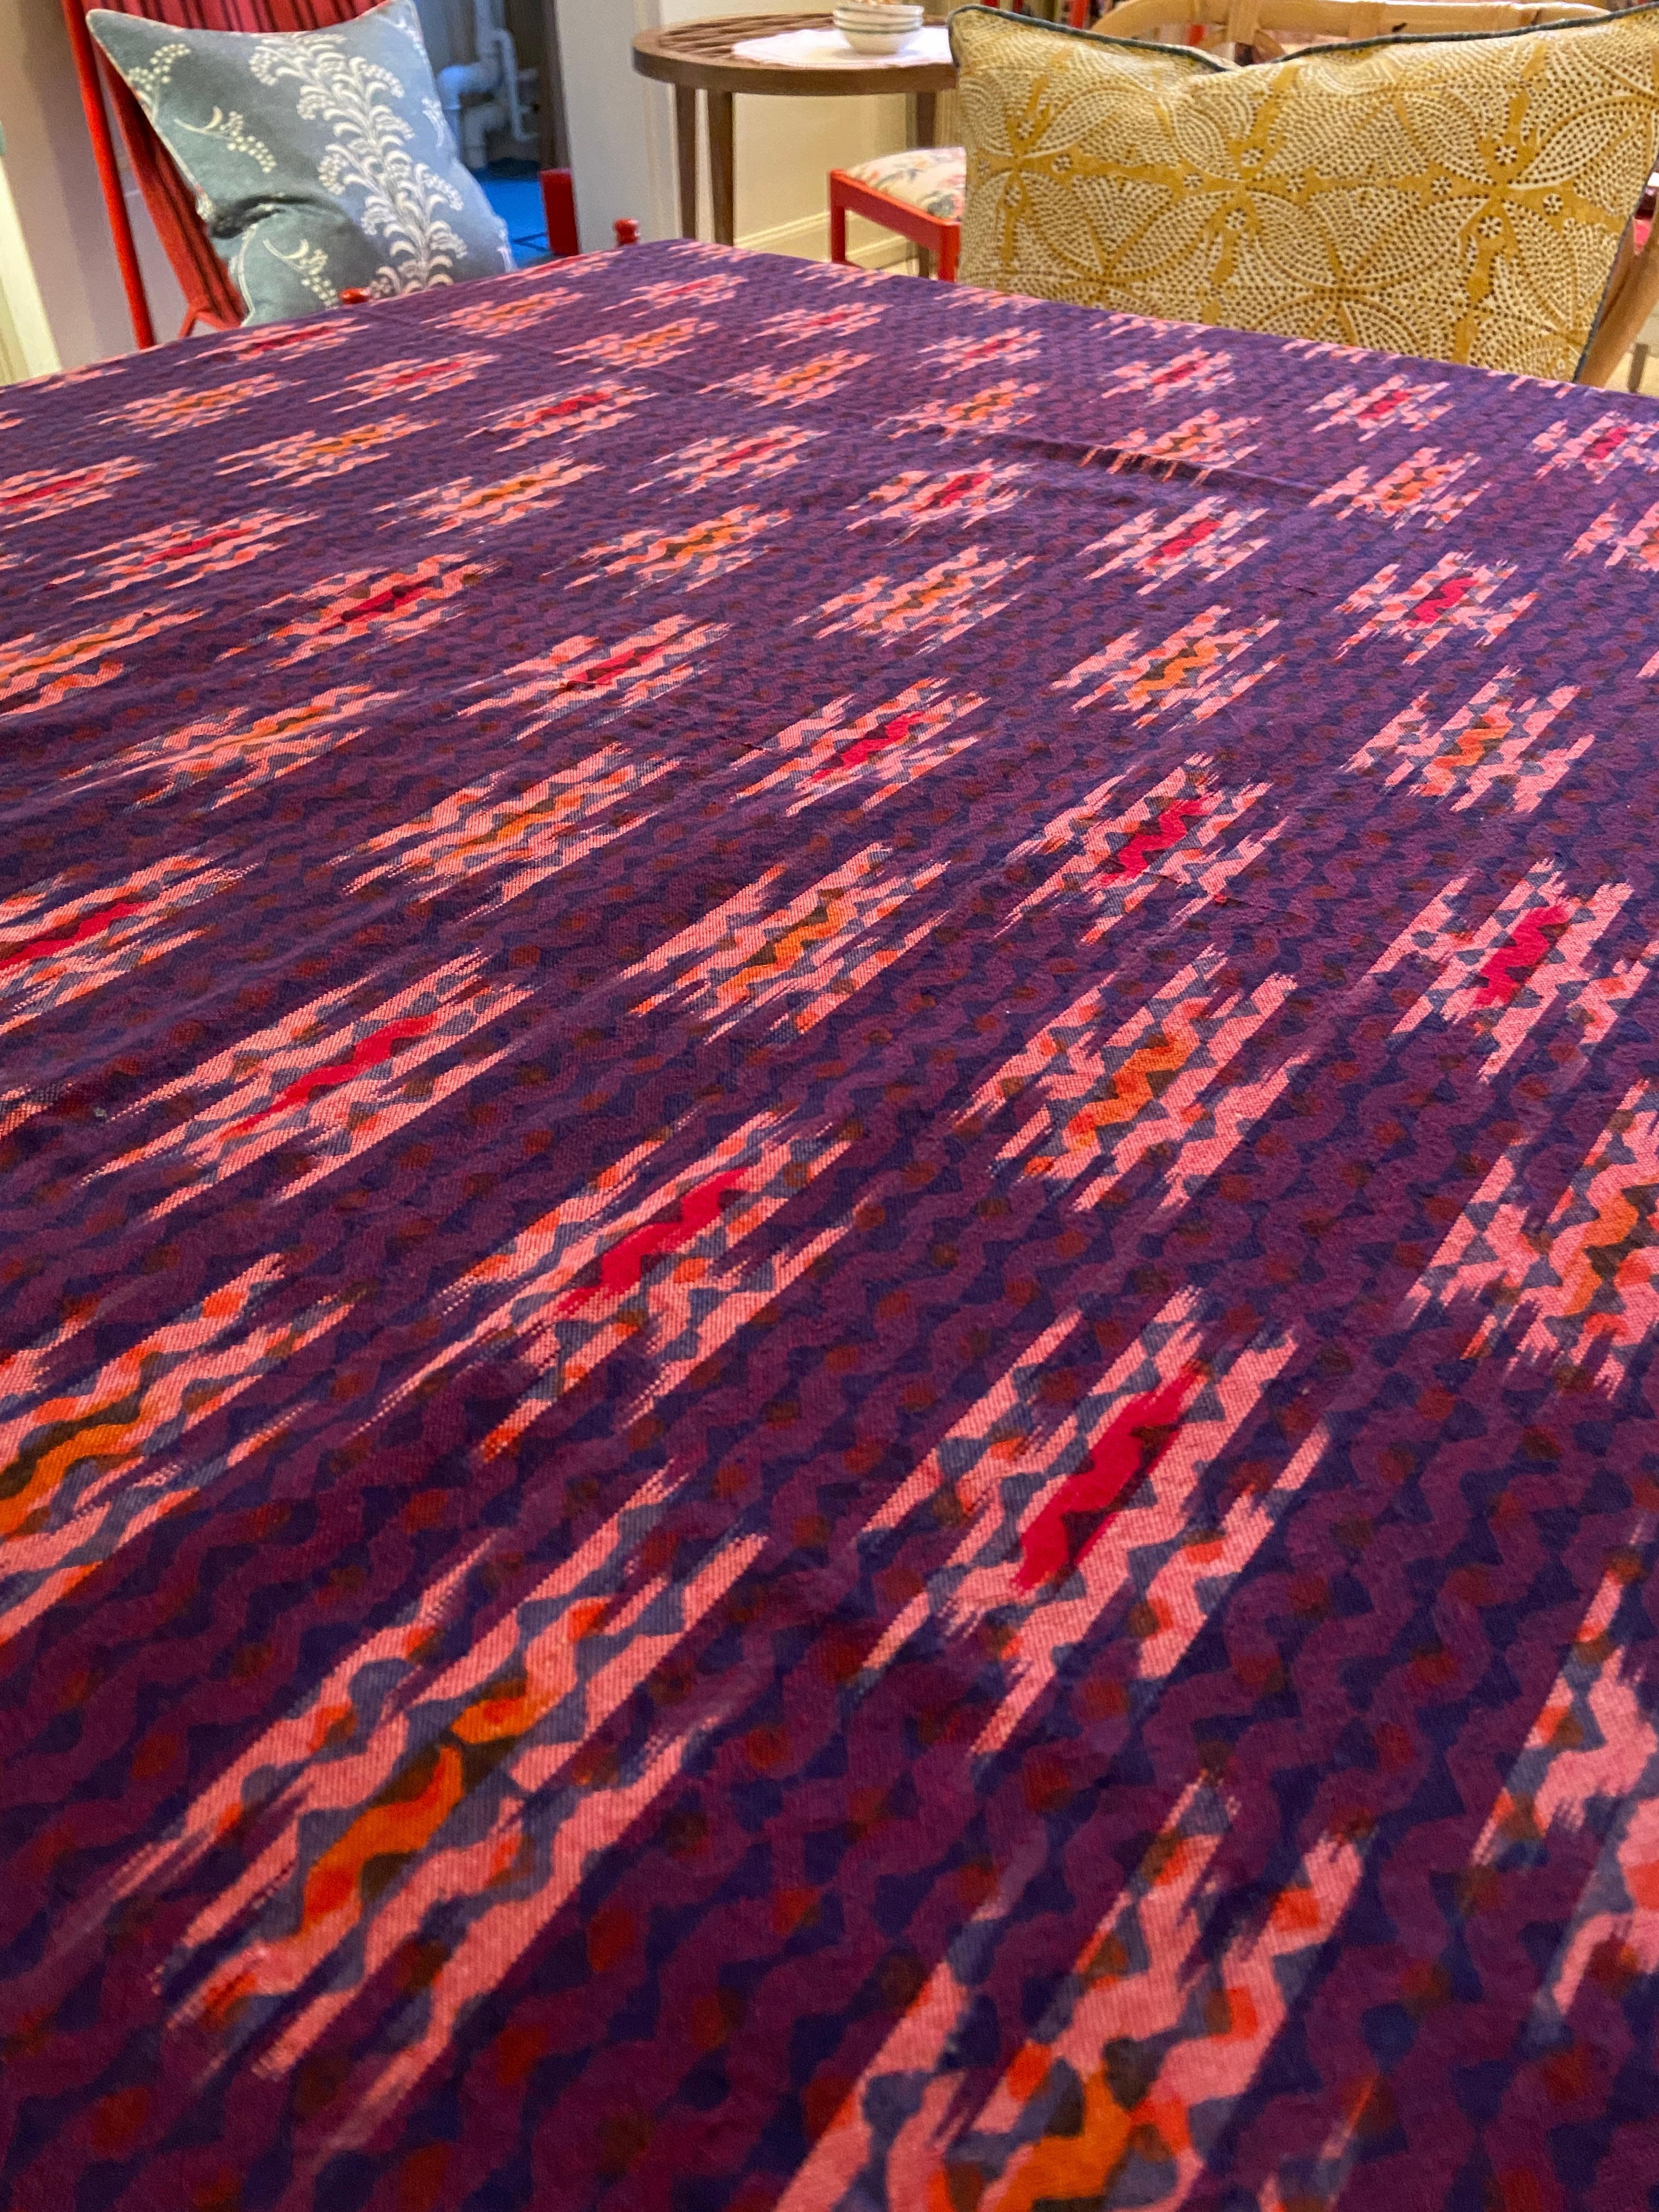 American Contemporary Gregory Parkinson Tablecloth Purple Pink Ikat Hand-Blocked Patterns